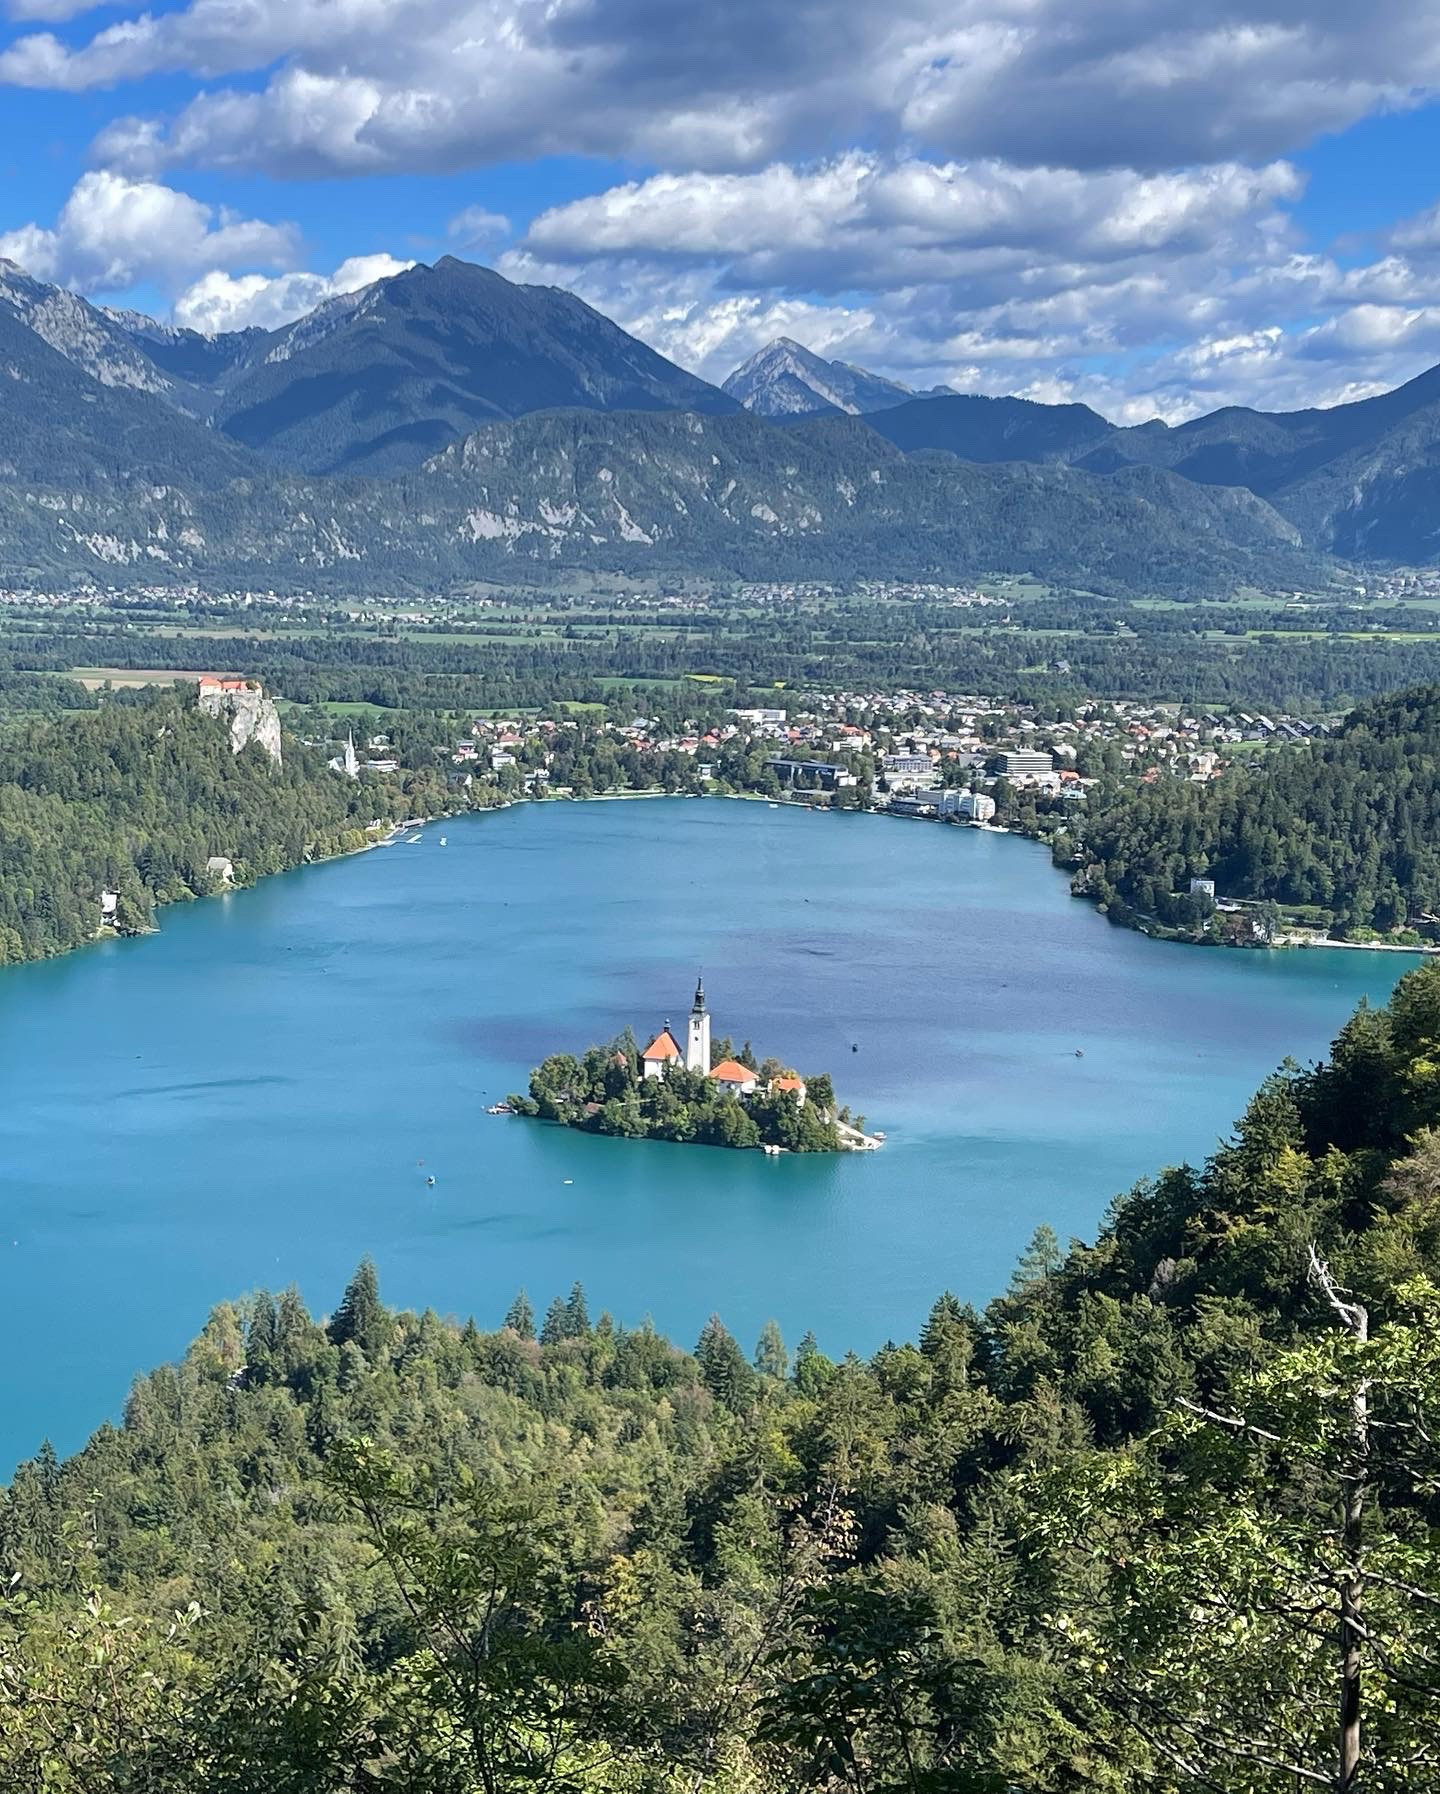 Lake Bled from the mountain viewpoint